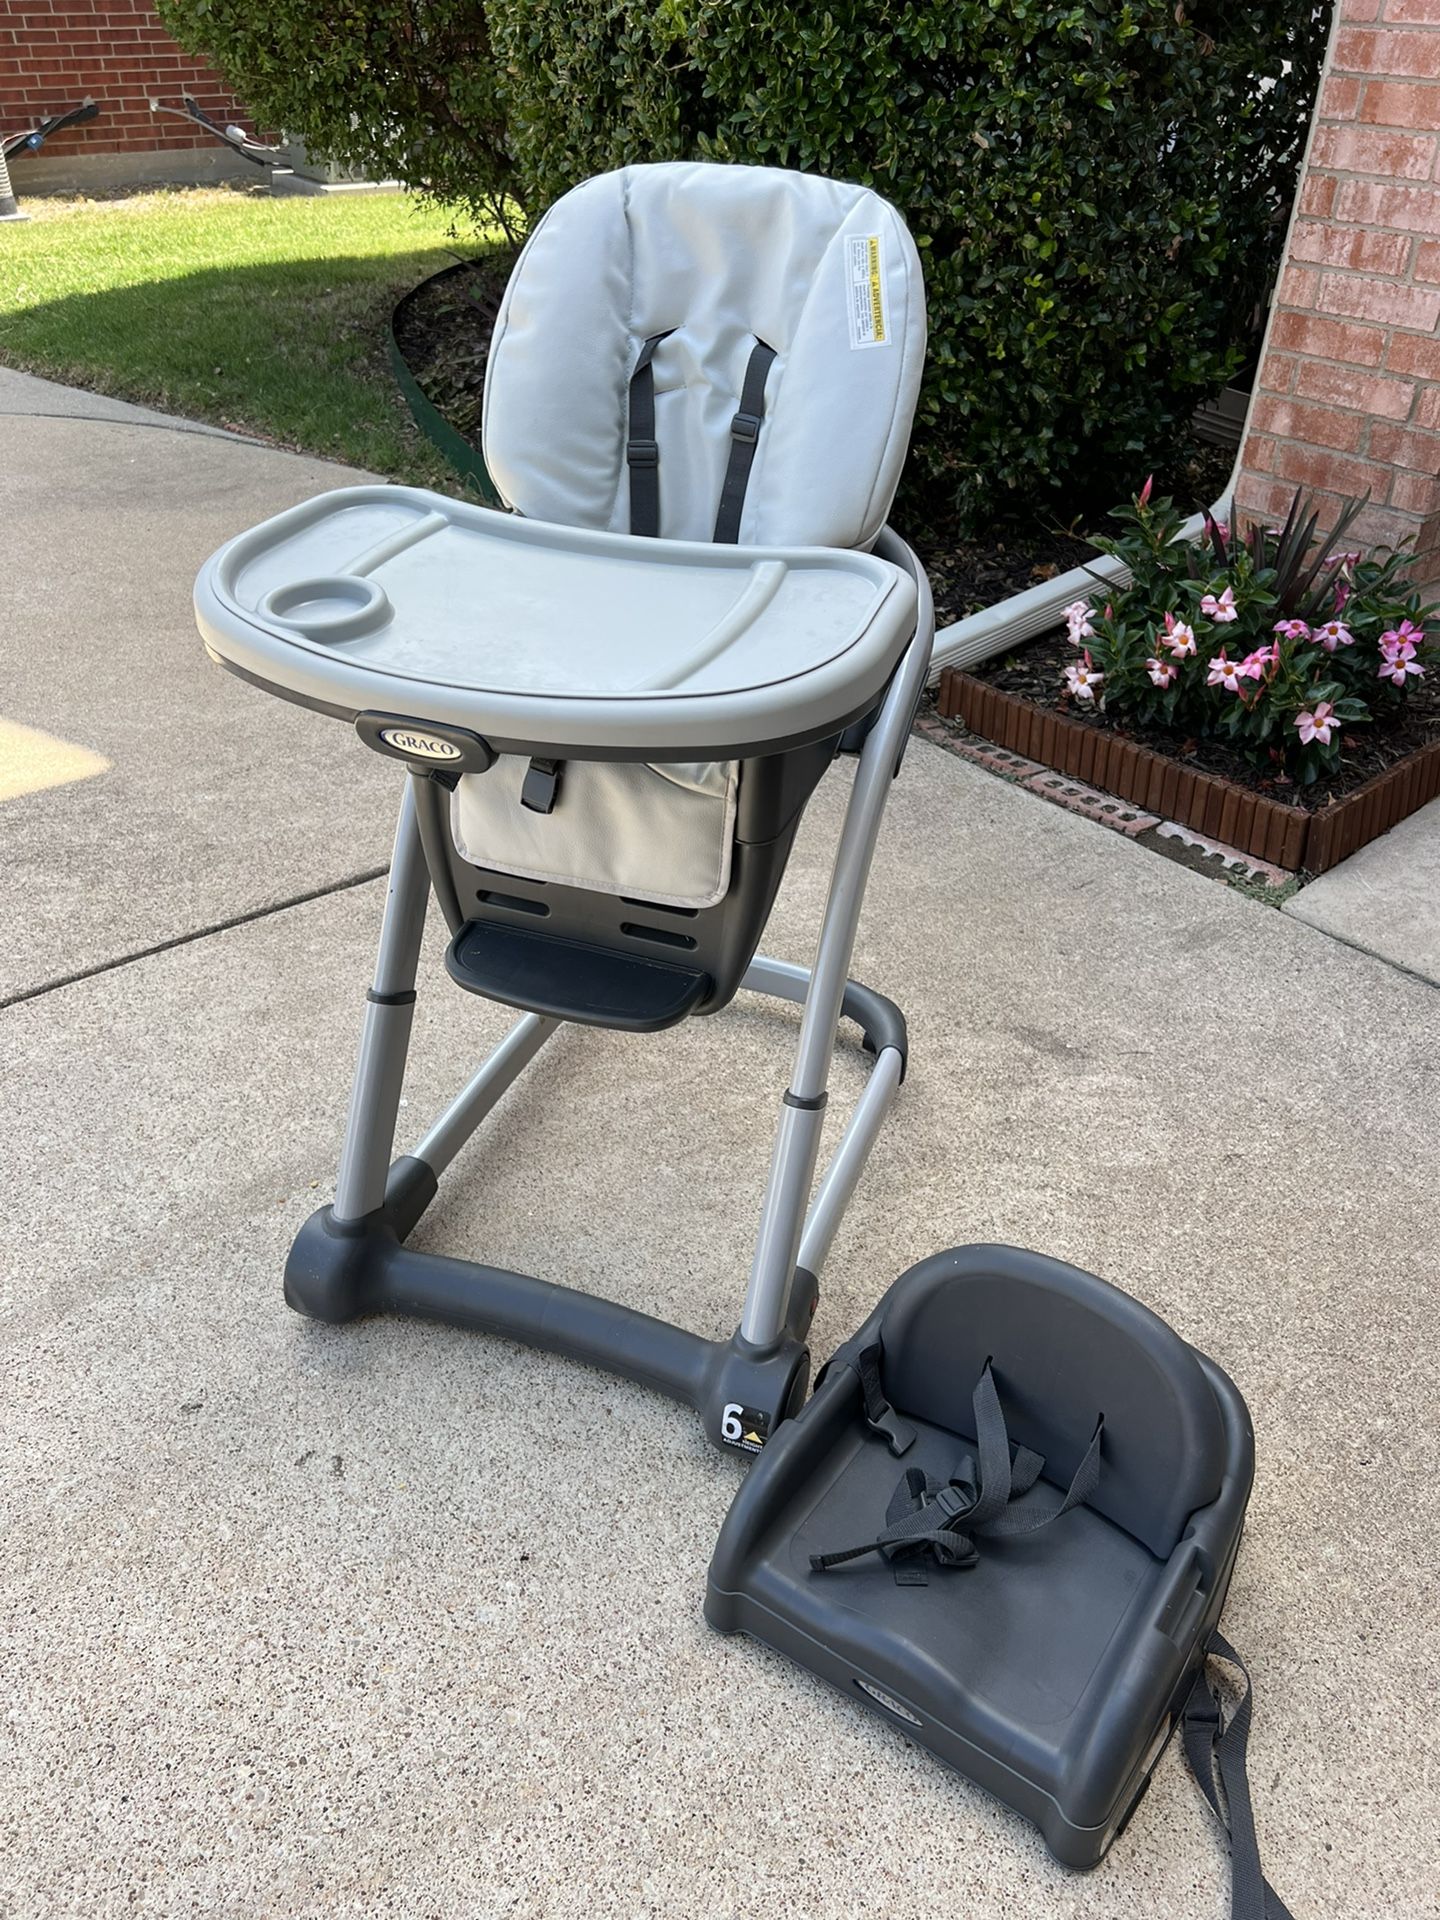 Graco 6 in 1 High Chair